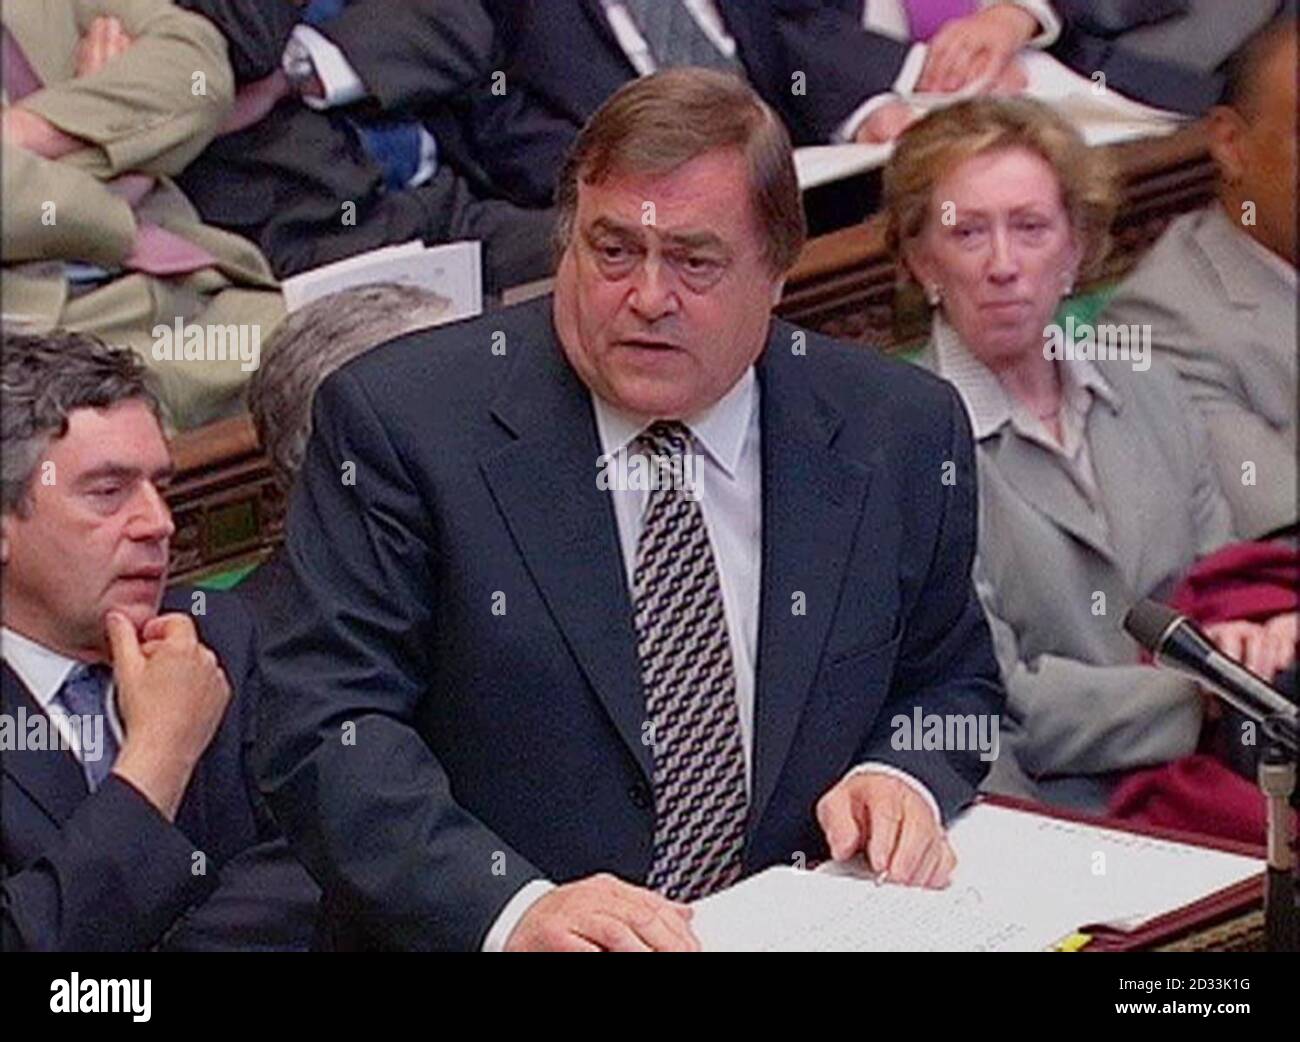 Video grab of Deputy Prime Minister John Prescott addressing the House of Commons, during Prime Minister's Questions.  Stock Photo